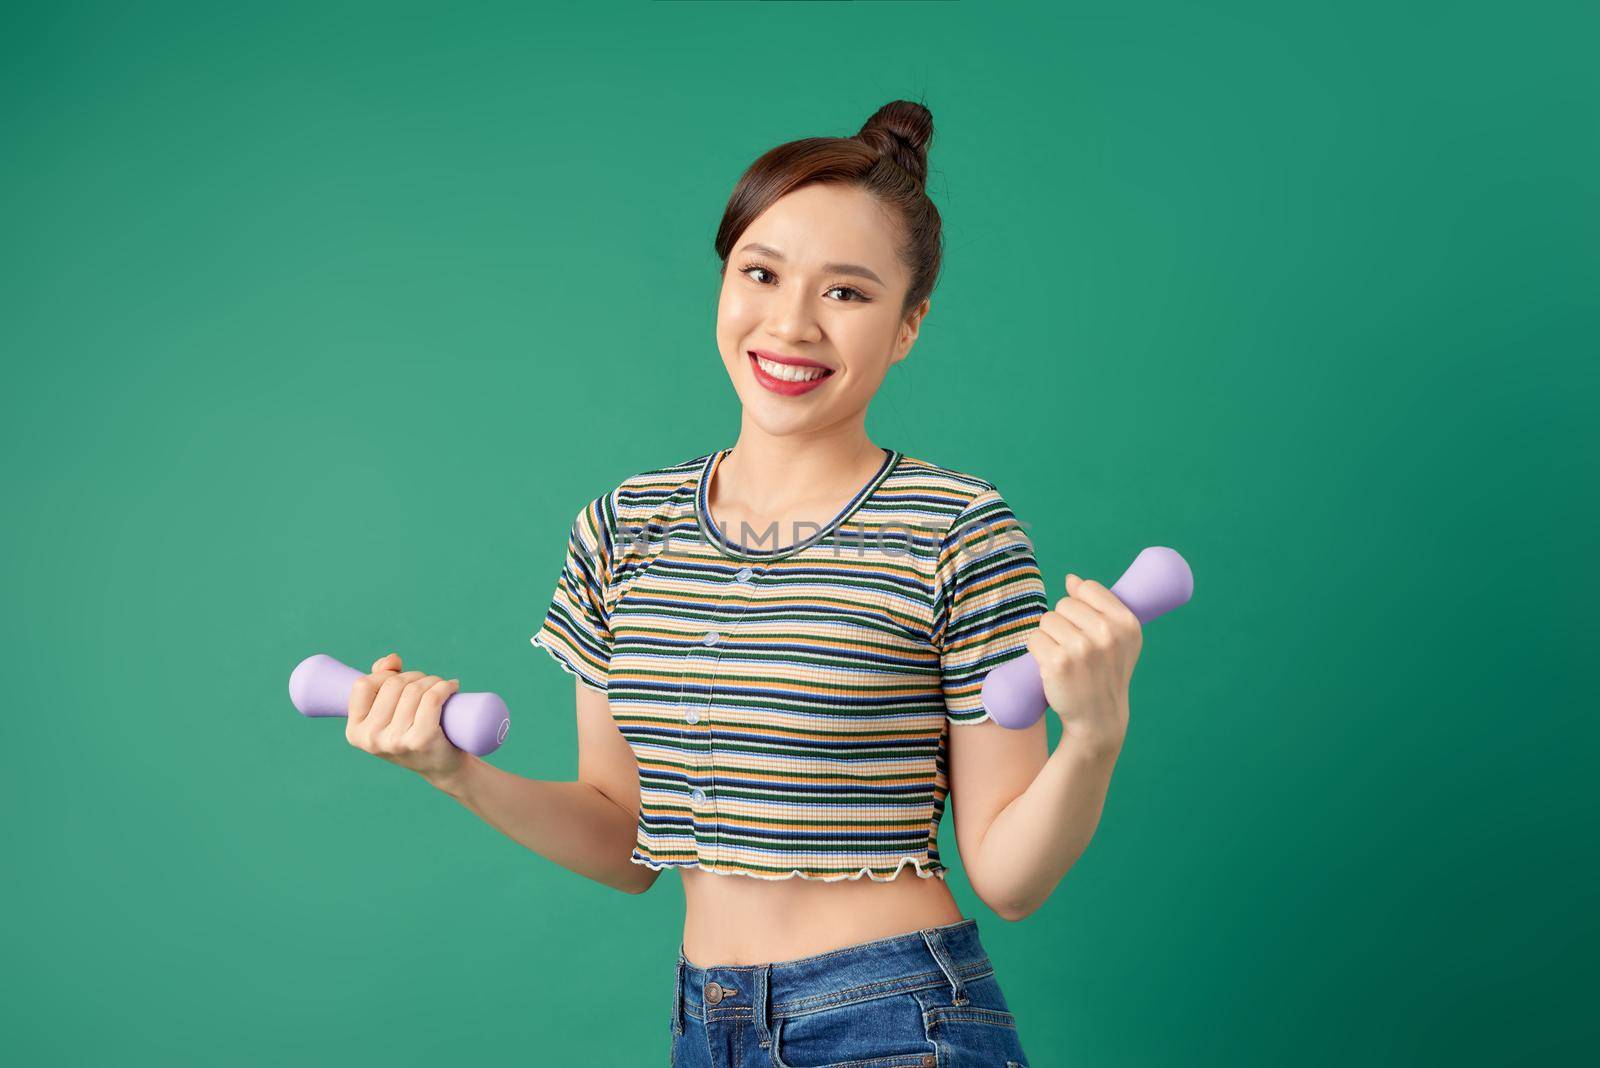 Young Asian woman holding dumbell and wearing casual clothing over green background.